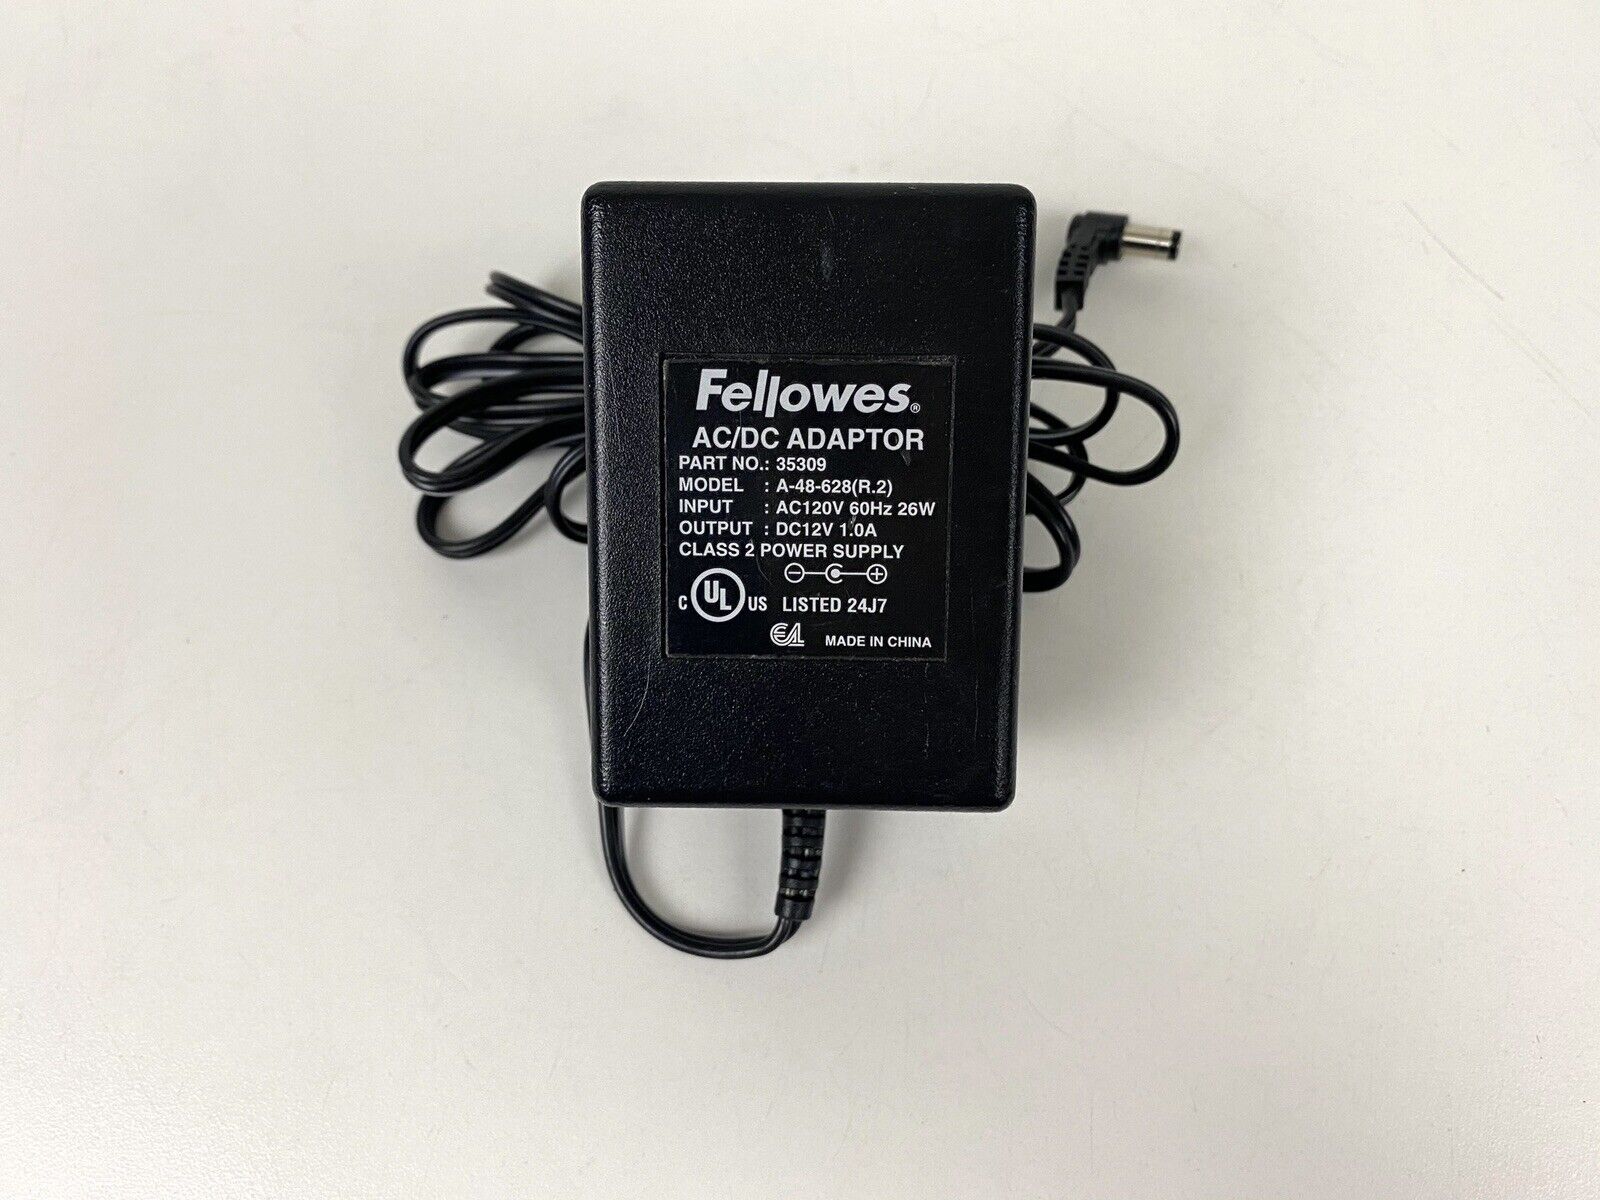 *Brand NEW* A-48-628 r.2 Fellowes Paper Cutter AC/DC adapter 35309 Power Supply